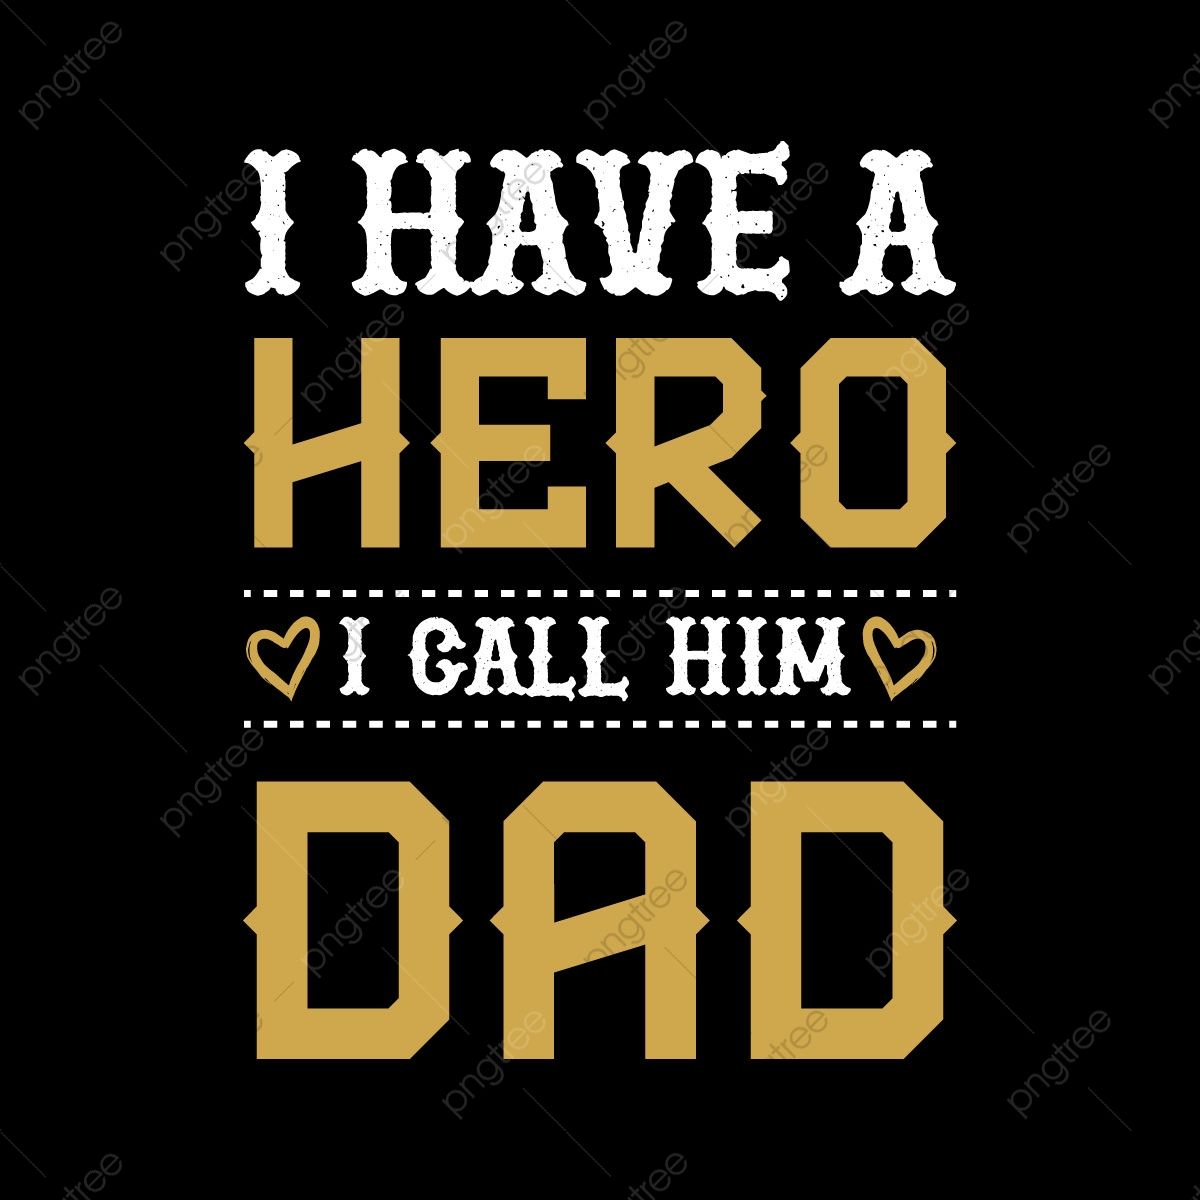 Father PNG Image. Vector and PSD Files. Free Download on Pngtree